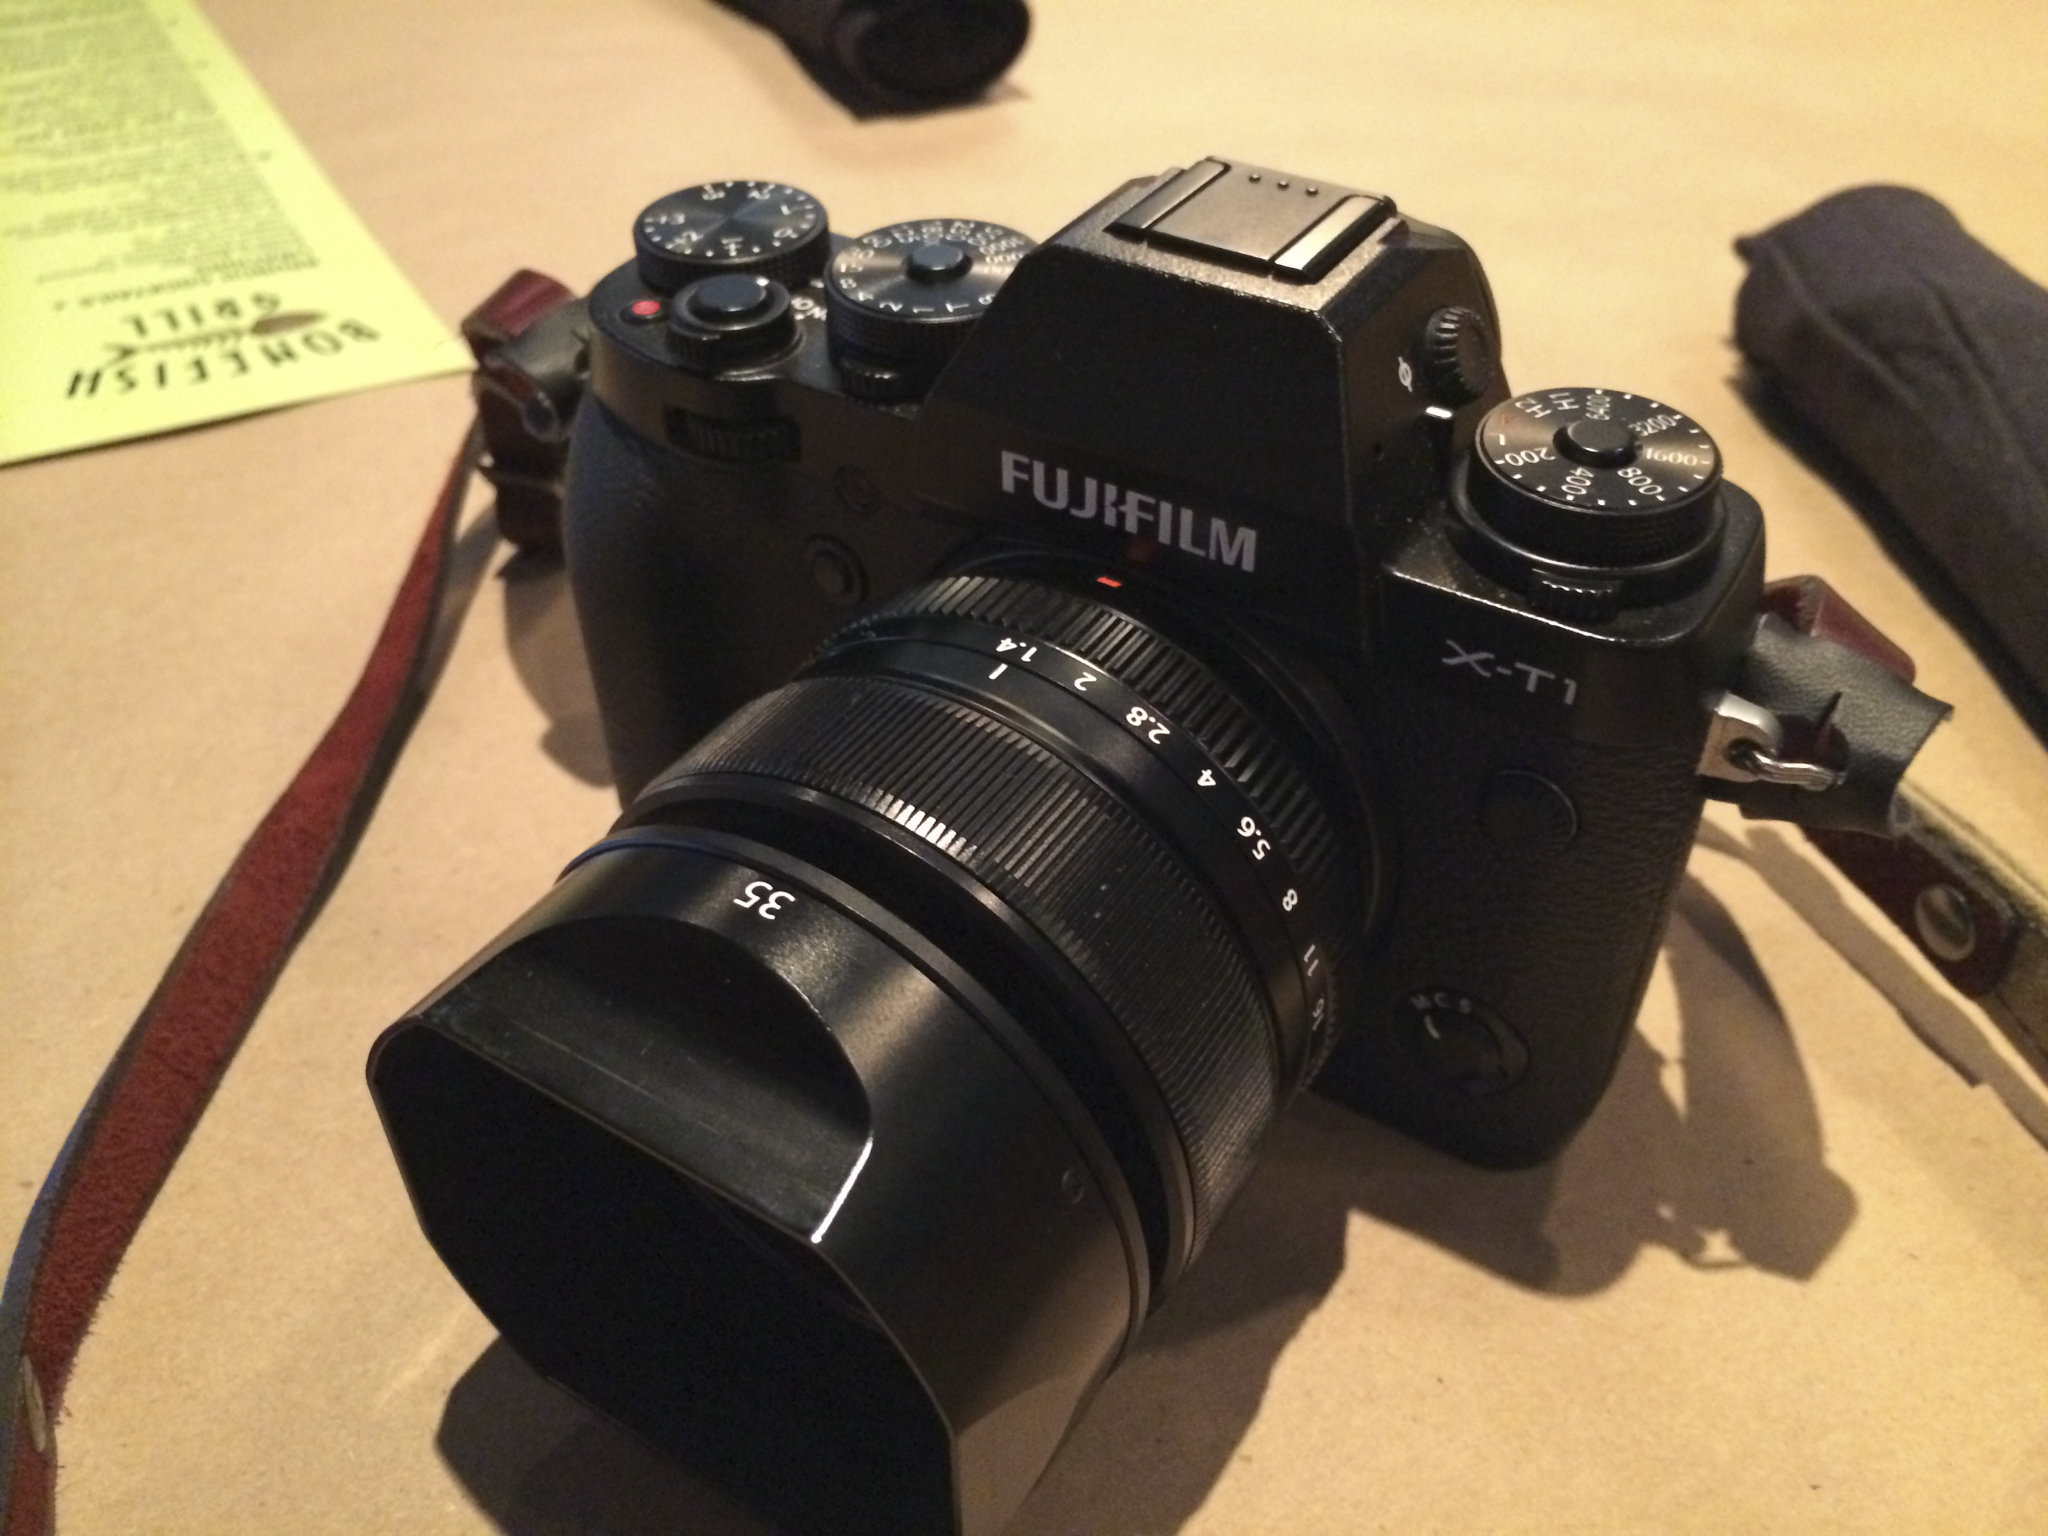 Fujifilm X-T1 and XF 35mm f1.4 lens. Not a notoriously large camera. It's about half the size of a comparable DSLR.